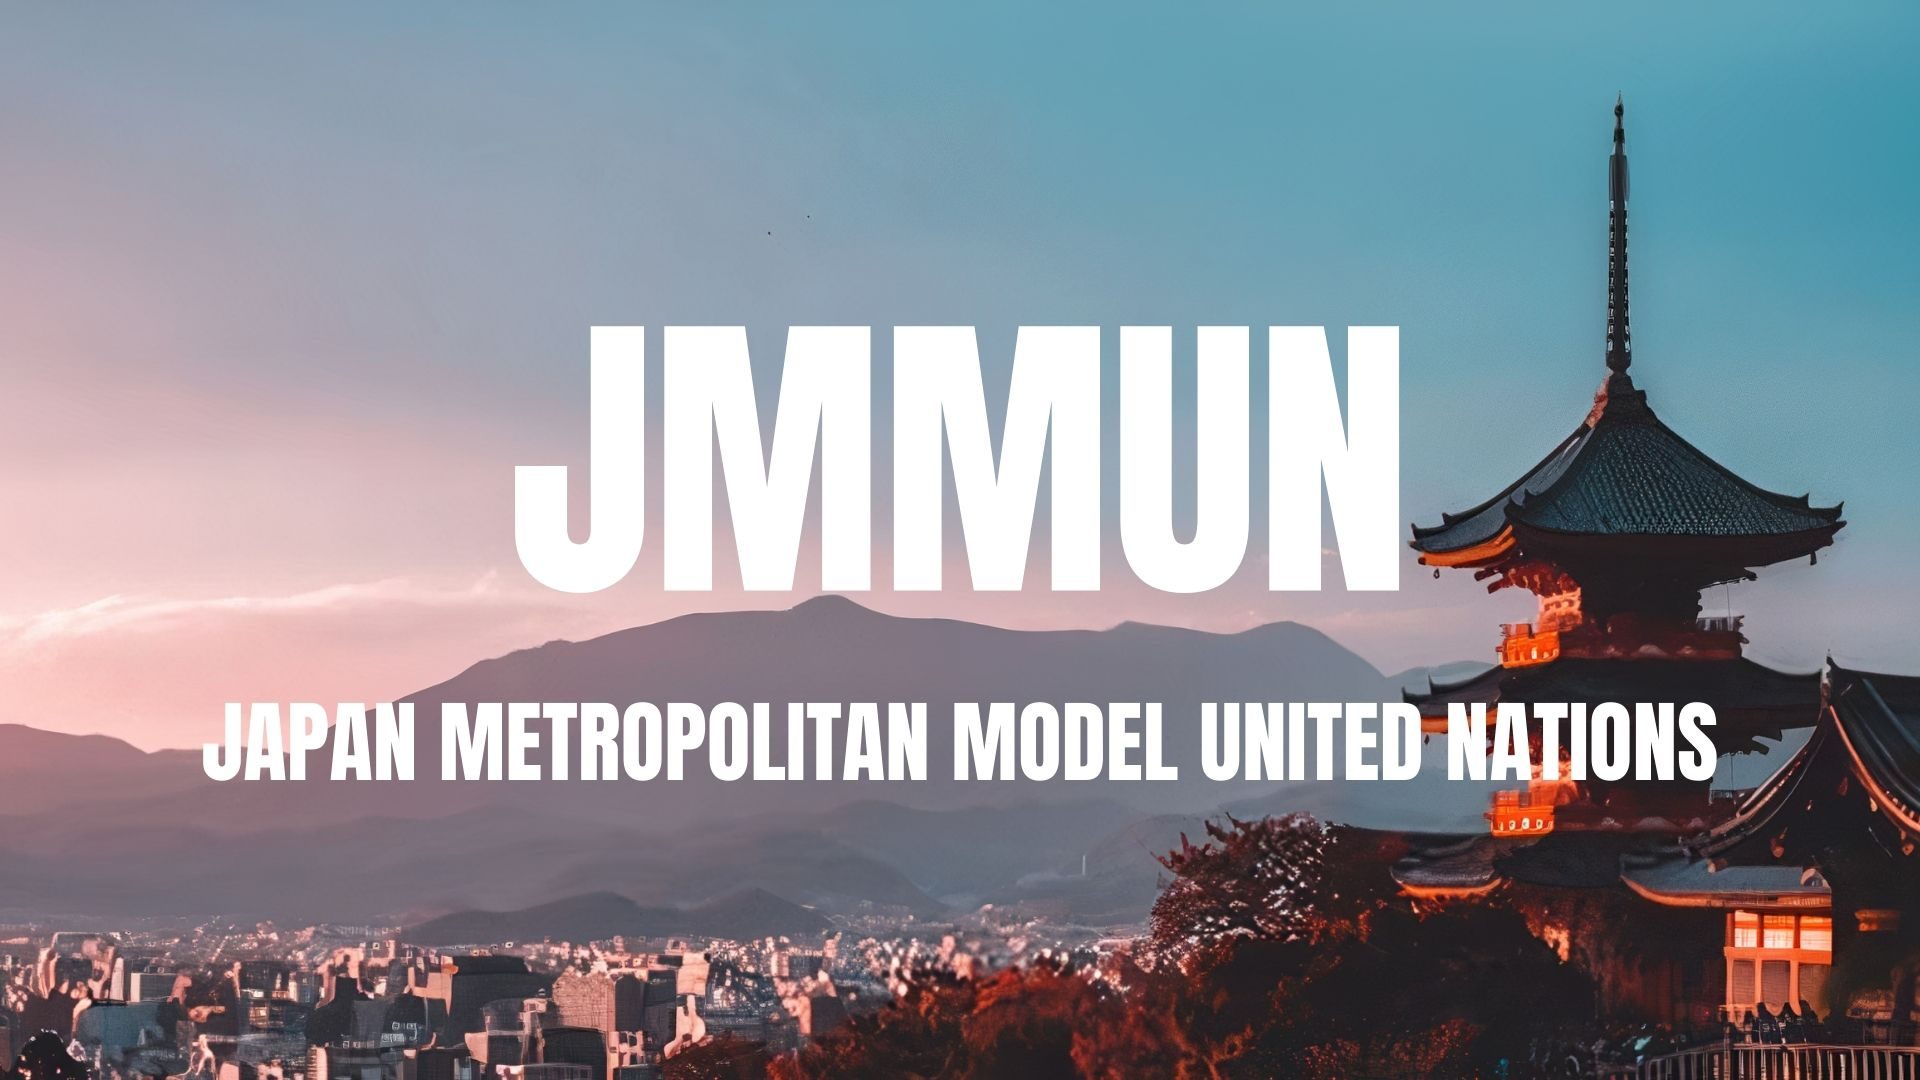 JMMUN TIMES 2023 is now published!